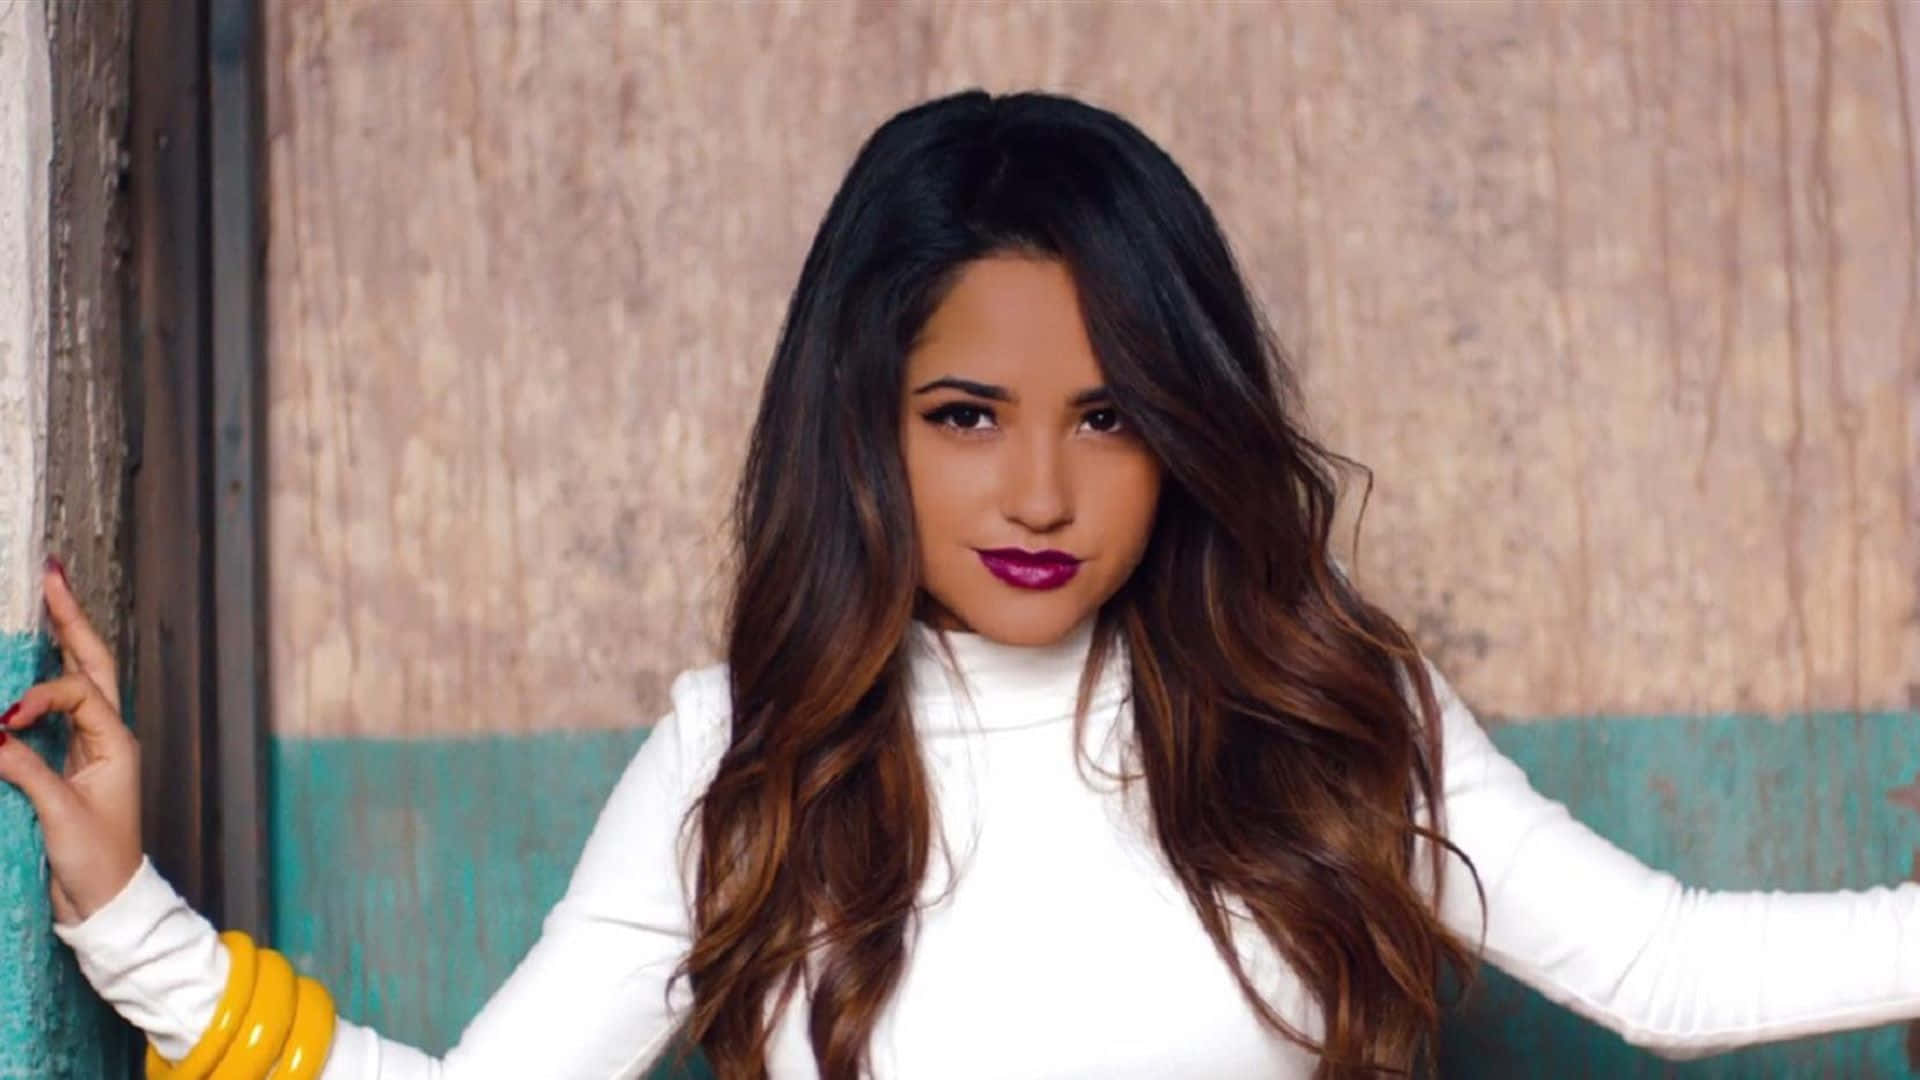 "Making moves with Becky G"